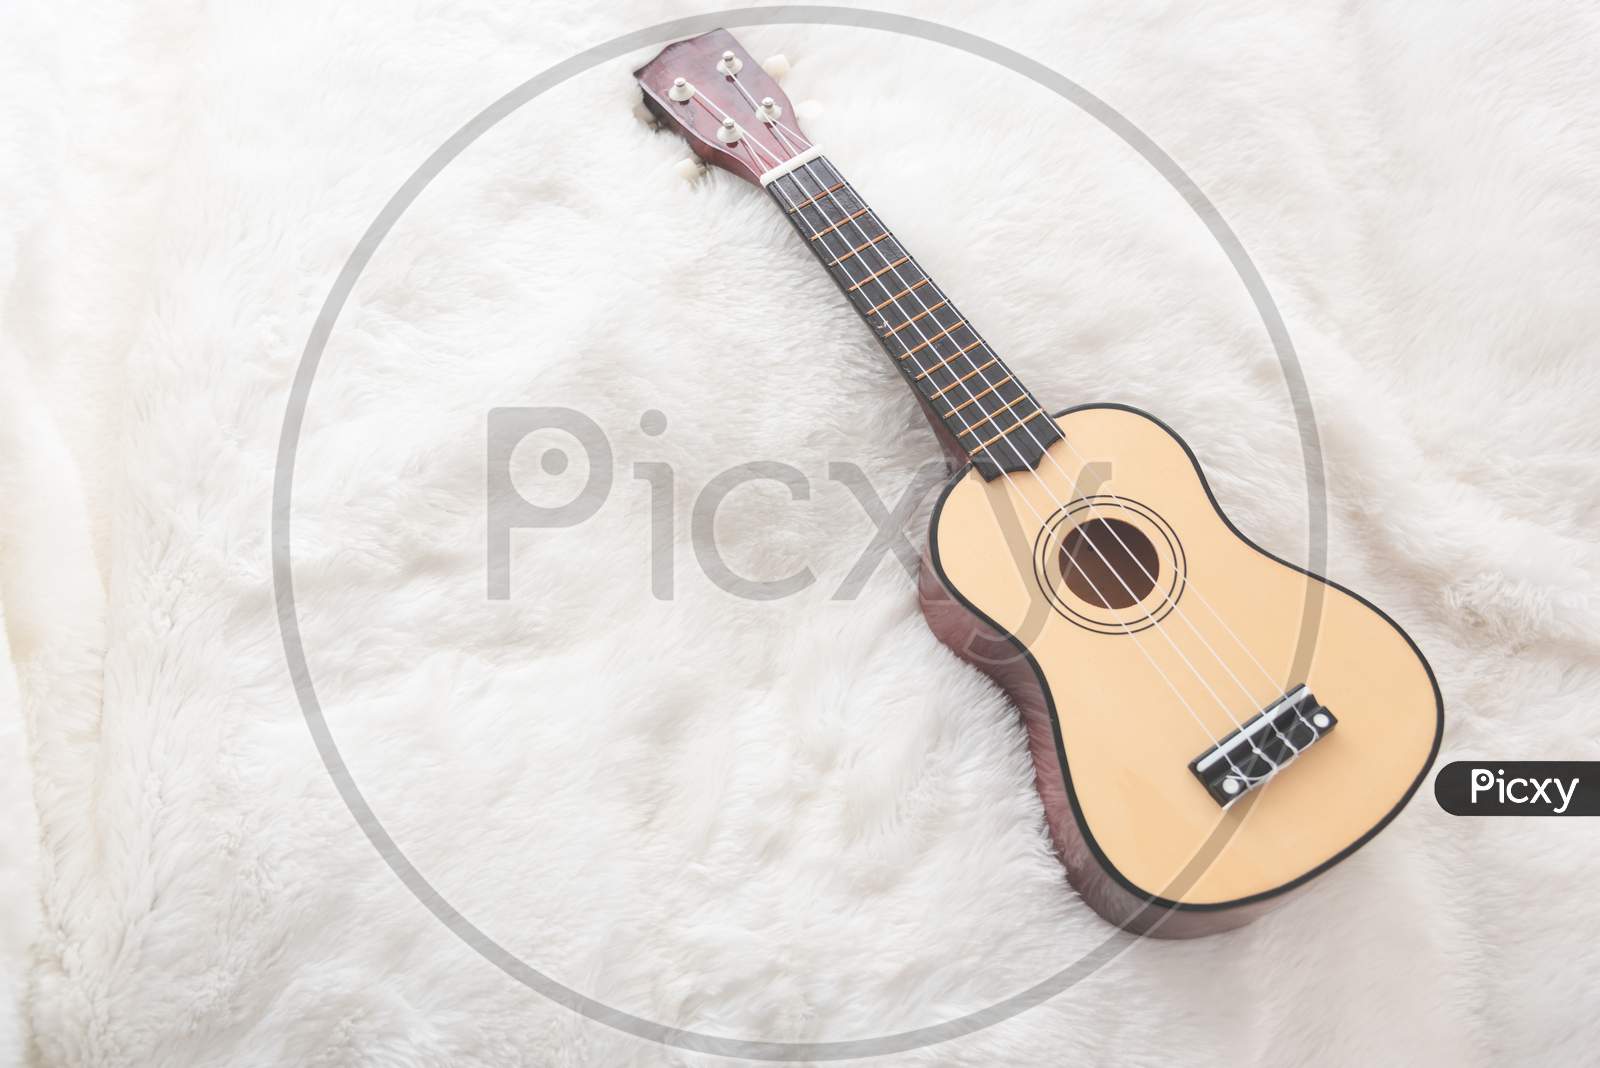 Small Guitar On White Wool. Musical Instrument And Leisure Concept. Travel And Relax Theme.